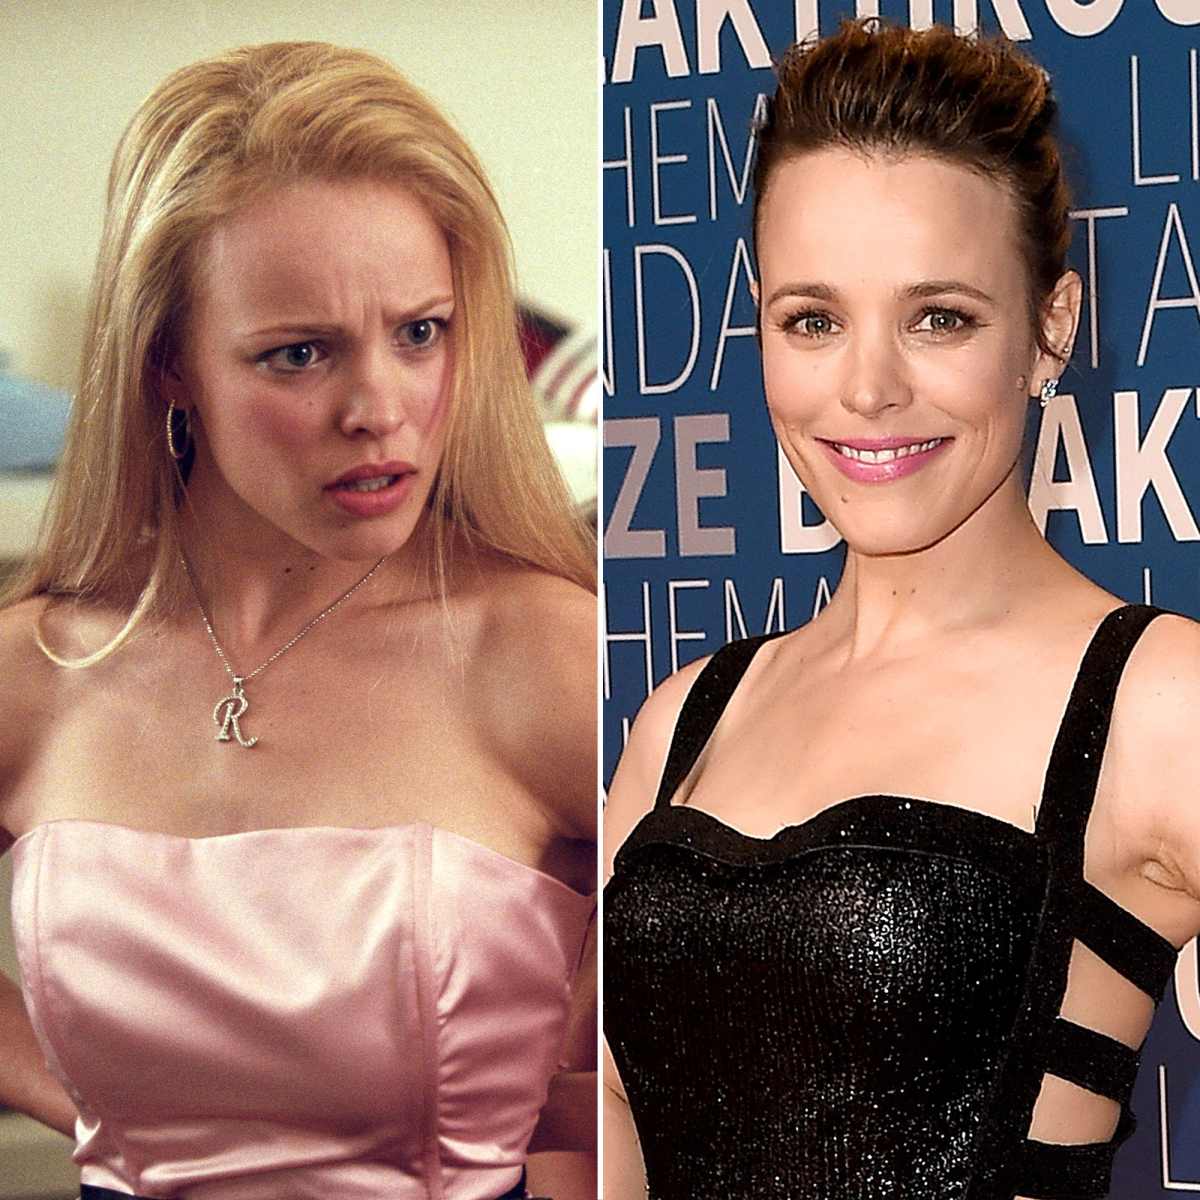 A Style Anatomy of the On-Screen Mean Girl.